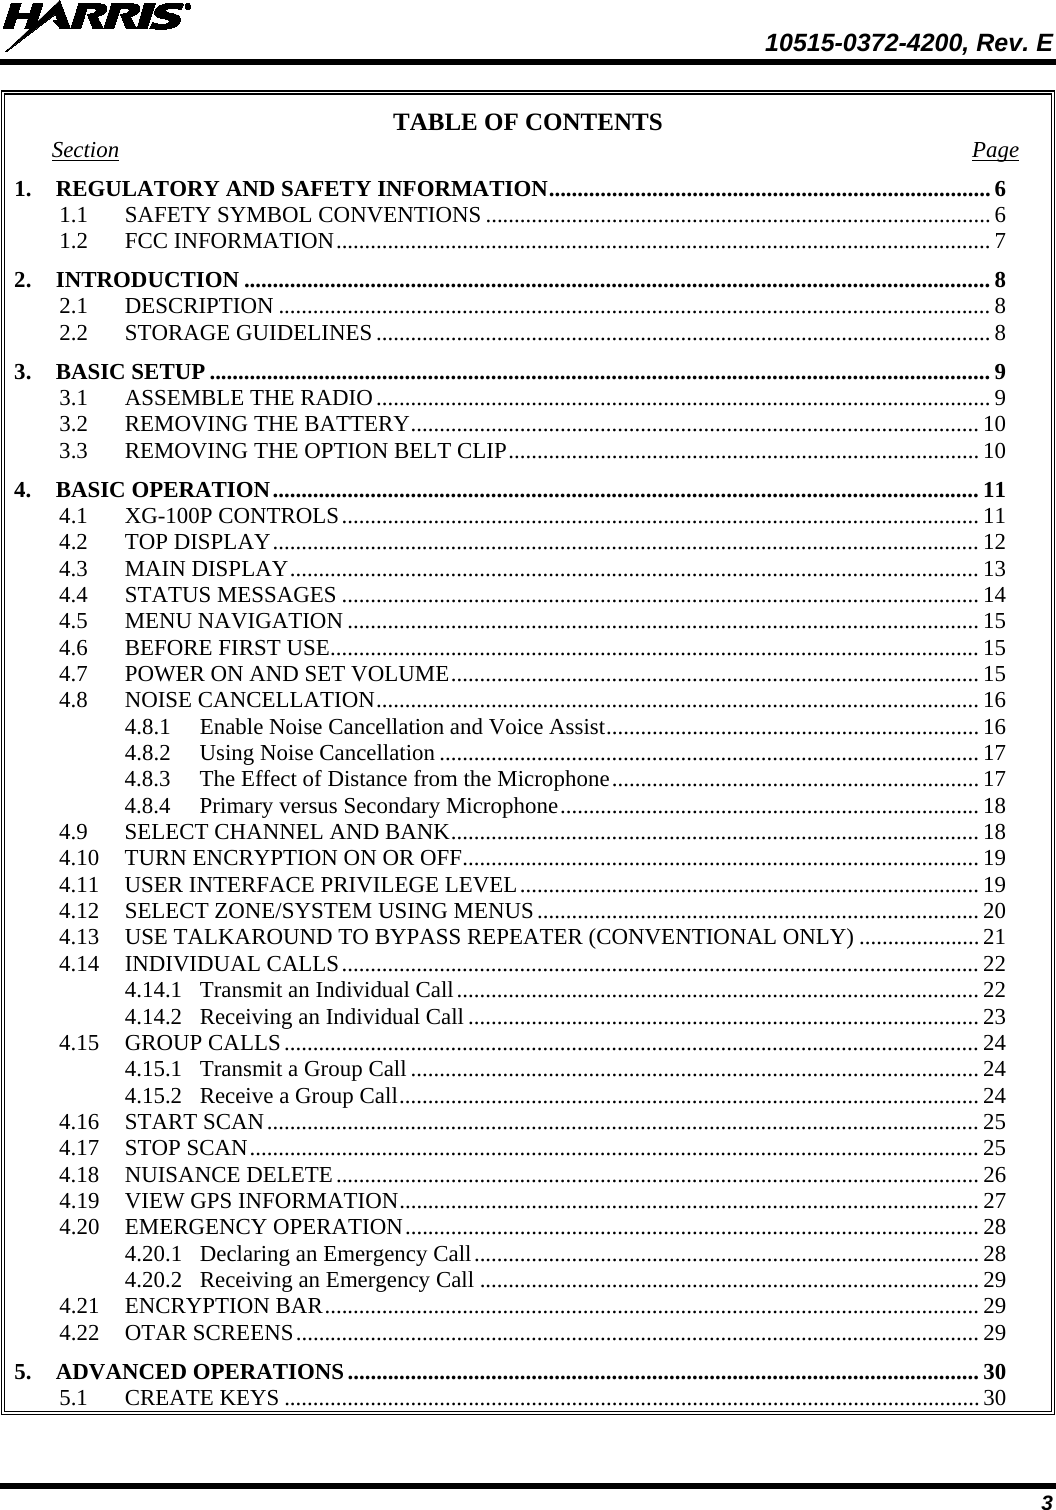  10515-0372-4200, Rev. E 3 TABLE OF CONTENTS Section Page 1. REGULATORY AND SAFETY INFORMATION ............................................................................. 6 1.1 SAFETY SYMBOL CONVENTIONS ........................................................................................ 6 1.2 FCC INFORMATION .................................................................................................................. 7 2. INTRODUCTION .................................................................................................................................. 8 2.1 DESCRIPTION ............................................................................................................................ 8 2.2 STORAGE GUIDELINES ........................................................................................................... 8 3. BASIC SETUP ........................................................................................................................................ 9 3.1 ASSEMBLE THE RADIO ........................................................................................................... 9 3.2 REMOVING THE BATTERY ................................................................................................... 10 3.3 REMOVING THE OPTION BELT CLIP .................................................................................. 10 4. BASIC OPERATION ........................................................................................................................... 11 4.1 XG-100P CONTROLS ............................................................................................................... 11 4.2 TOP DISPLAY ........................................................................................................................... 12 4.3 MAIN DISPLAY ........................................................................................................................ 13 4.4 STATUS MESSAGES ............................................................................................................... 14 4.5 MENU NAVIGATION .............................................................................................................. 15 4.6 BEFORE FIRST USE ................................................................................................................. 15 4.7 POWER ON AND SET VOLUME ............................................................................................ 15 4.8 NOISE CANCELLATION ......................................................................................................... 16 4.8.1 Enable Noise Cancellation and Voice Assist ................................................................. 16 4.8.2 Using Noise Cancellation .............................................................................................. 17 4.8.3 The Effect of Distance from the Microphone ................................................................ 17 4.8.4 Primary versus Secondary Microphone ......................................................................... 18 4.9 SELECT CHANNEL AND BANK ............................................................................................ 18 4.10 TURN ENCRYPTION ON OR OFF .......................................................................................... 19 4.11 USER INTERFACE PRIVILEGE LEVEL ................................................................................ 19 4.12 SELECT ZONE/SYSTEM USING MENUS ............................................................................. 20 4.13 USE TALKAROUND TO BYPASS REPEATER (CONVENTIONAL ONLY) ..................... 21 4.14 INDIVIDUAL CALLS ............................................................................................................... 22 4.14.1 Transmit an Individual Call ........................................................................................... 22 4.14.2 Receiving an Individual Call ......................................................................................... 23 4.15 GROUP CALLS ......................................................................................................................... 24 4.15.1 Transmit a Group Call ................................................................................................... 24 4.15.2 Receive a Group Call ..................................................................................................... 24 4.16 START SCAN ............................................................................................................................ 25 4.17 STOP SCAN ............................................................................................................................... 25 4.18 NUISANCE DELETE ................................................................................................................ 26 4.19 VIEW GPS INFORMATION ..................................................................................................... 27 4.20 EMERGENCY OPERATION .................................................................................................... 28 4.20.1 Declaring an Emergency Call ........................................................................................ 28 4.20.2 Receiving an Emergency Call ....................................................................................... 29 4.21 ENCRYPTION BAR .................................................................................................................. 29 4.22 OTAR SCREENS ....................................................................................................................... 29 5. ADVANCED OPERATIONS .............................................................................................................. 30 5.1 CREATE KEYS ......................................................................................................................... 30 